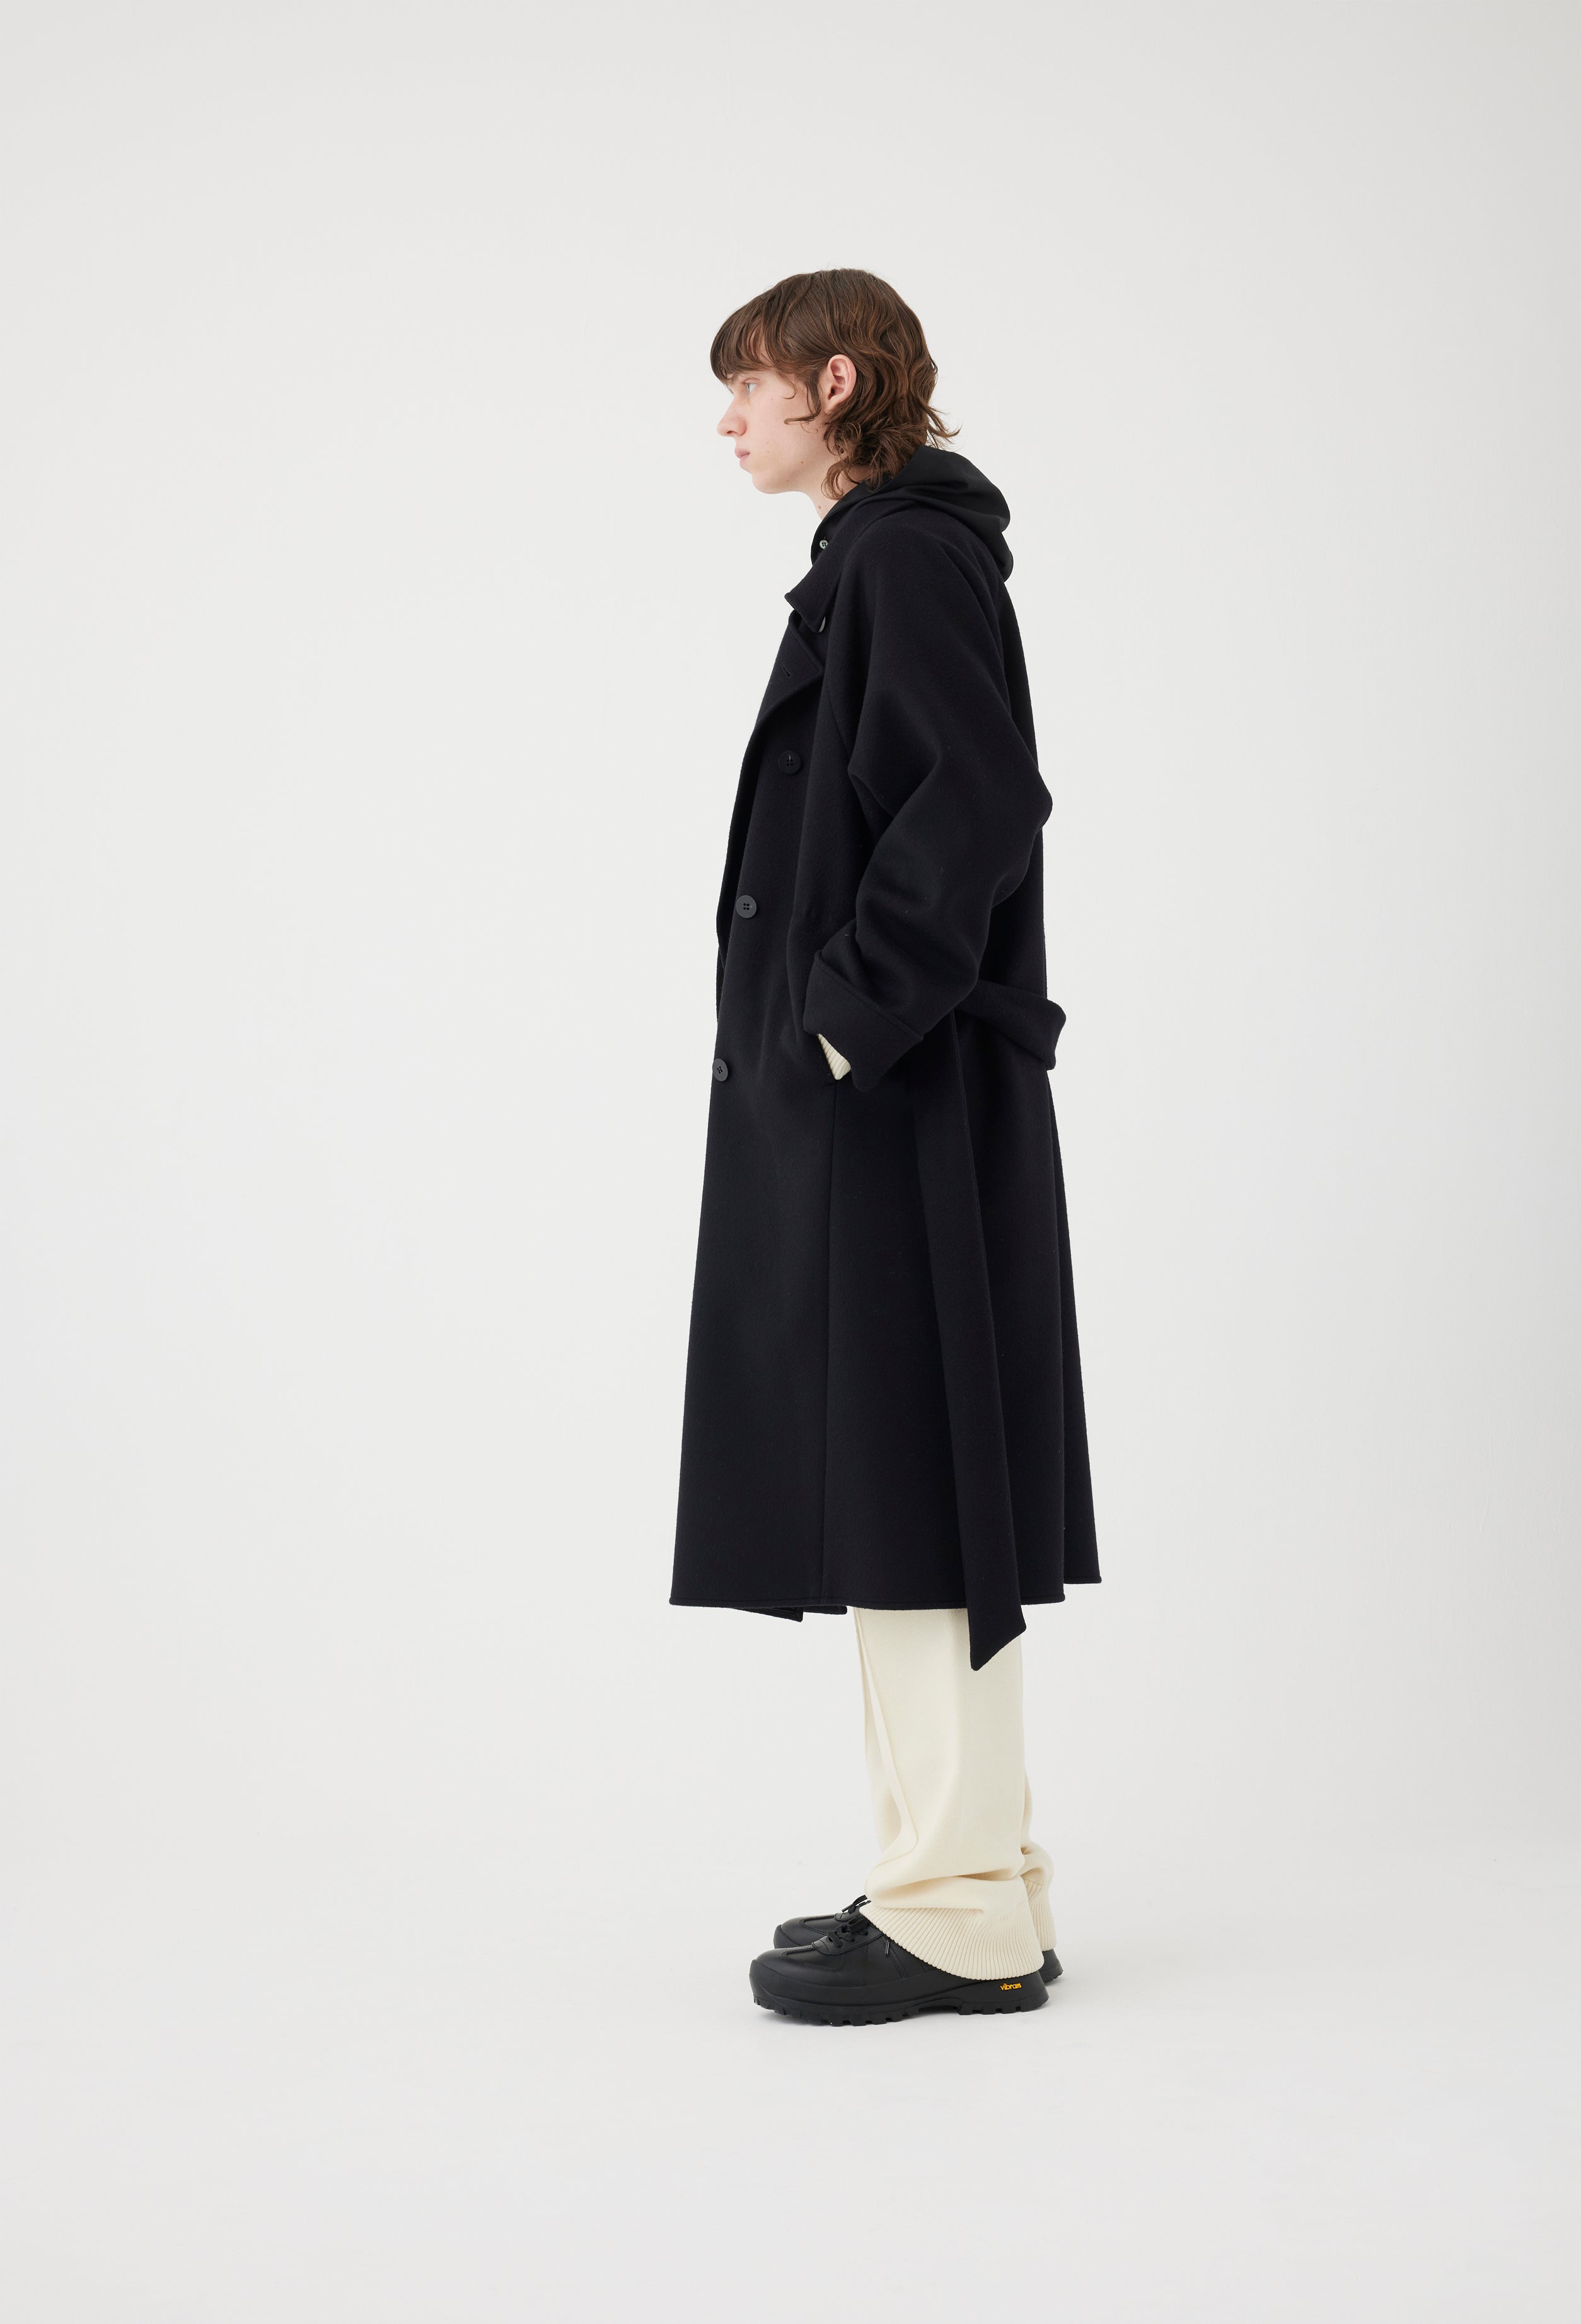 Beaver Wool Double Breasted Overcoat